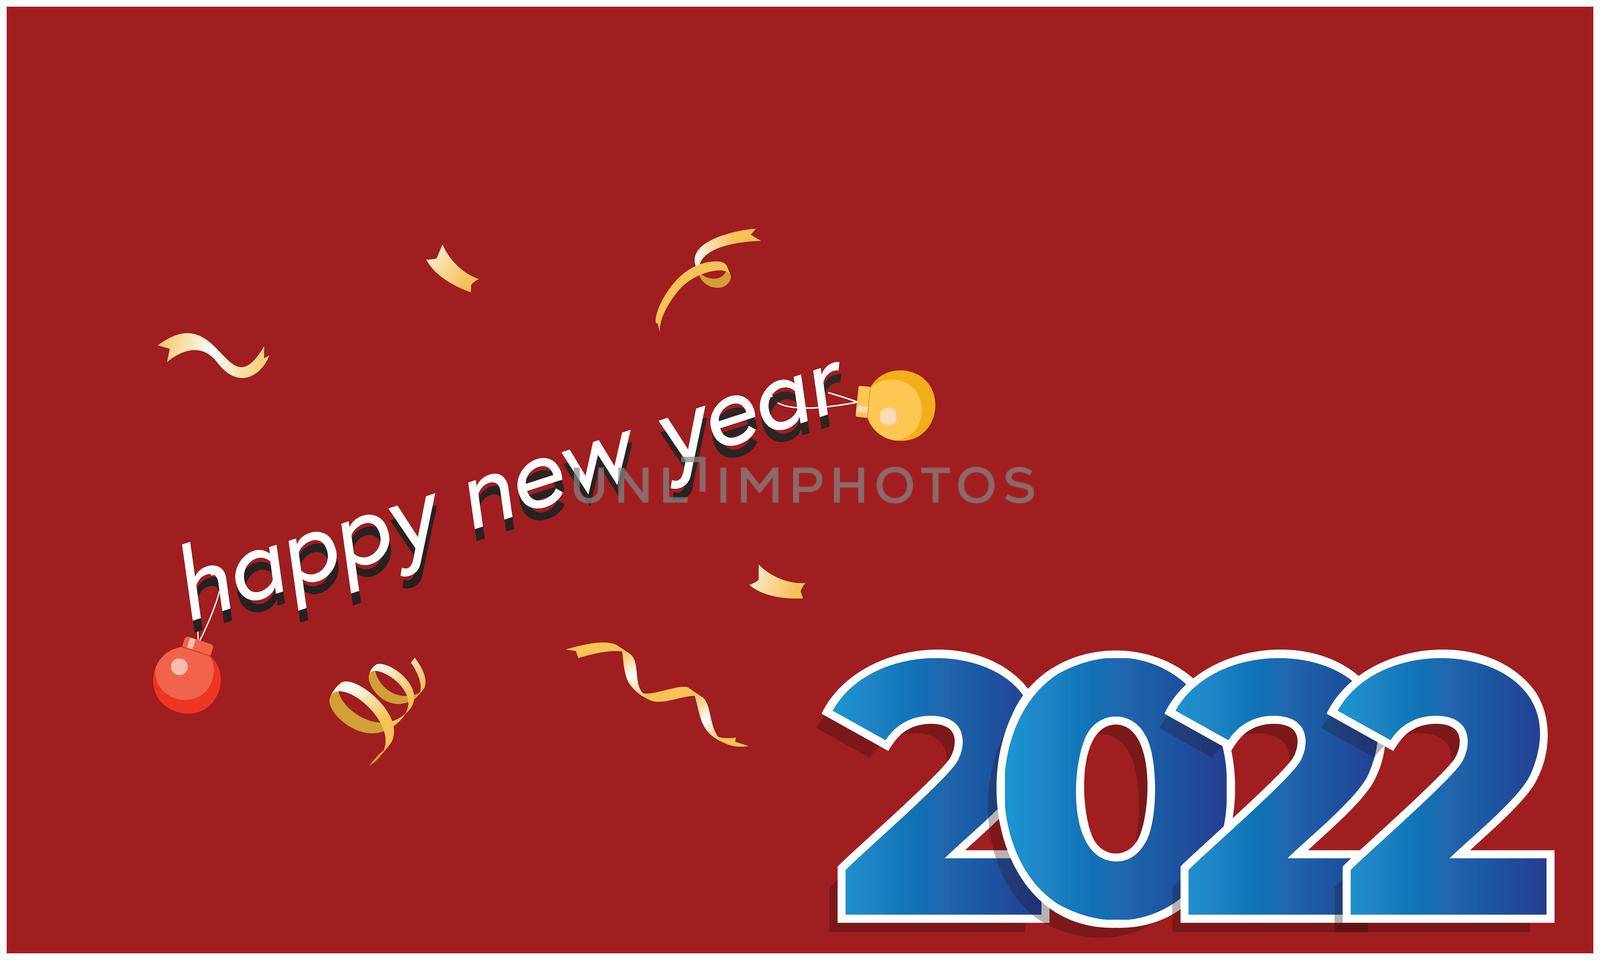 art of Happy new year 2022 on abstract red background by aanavcreationsplus